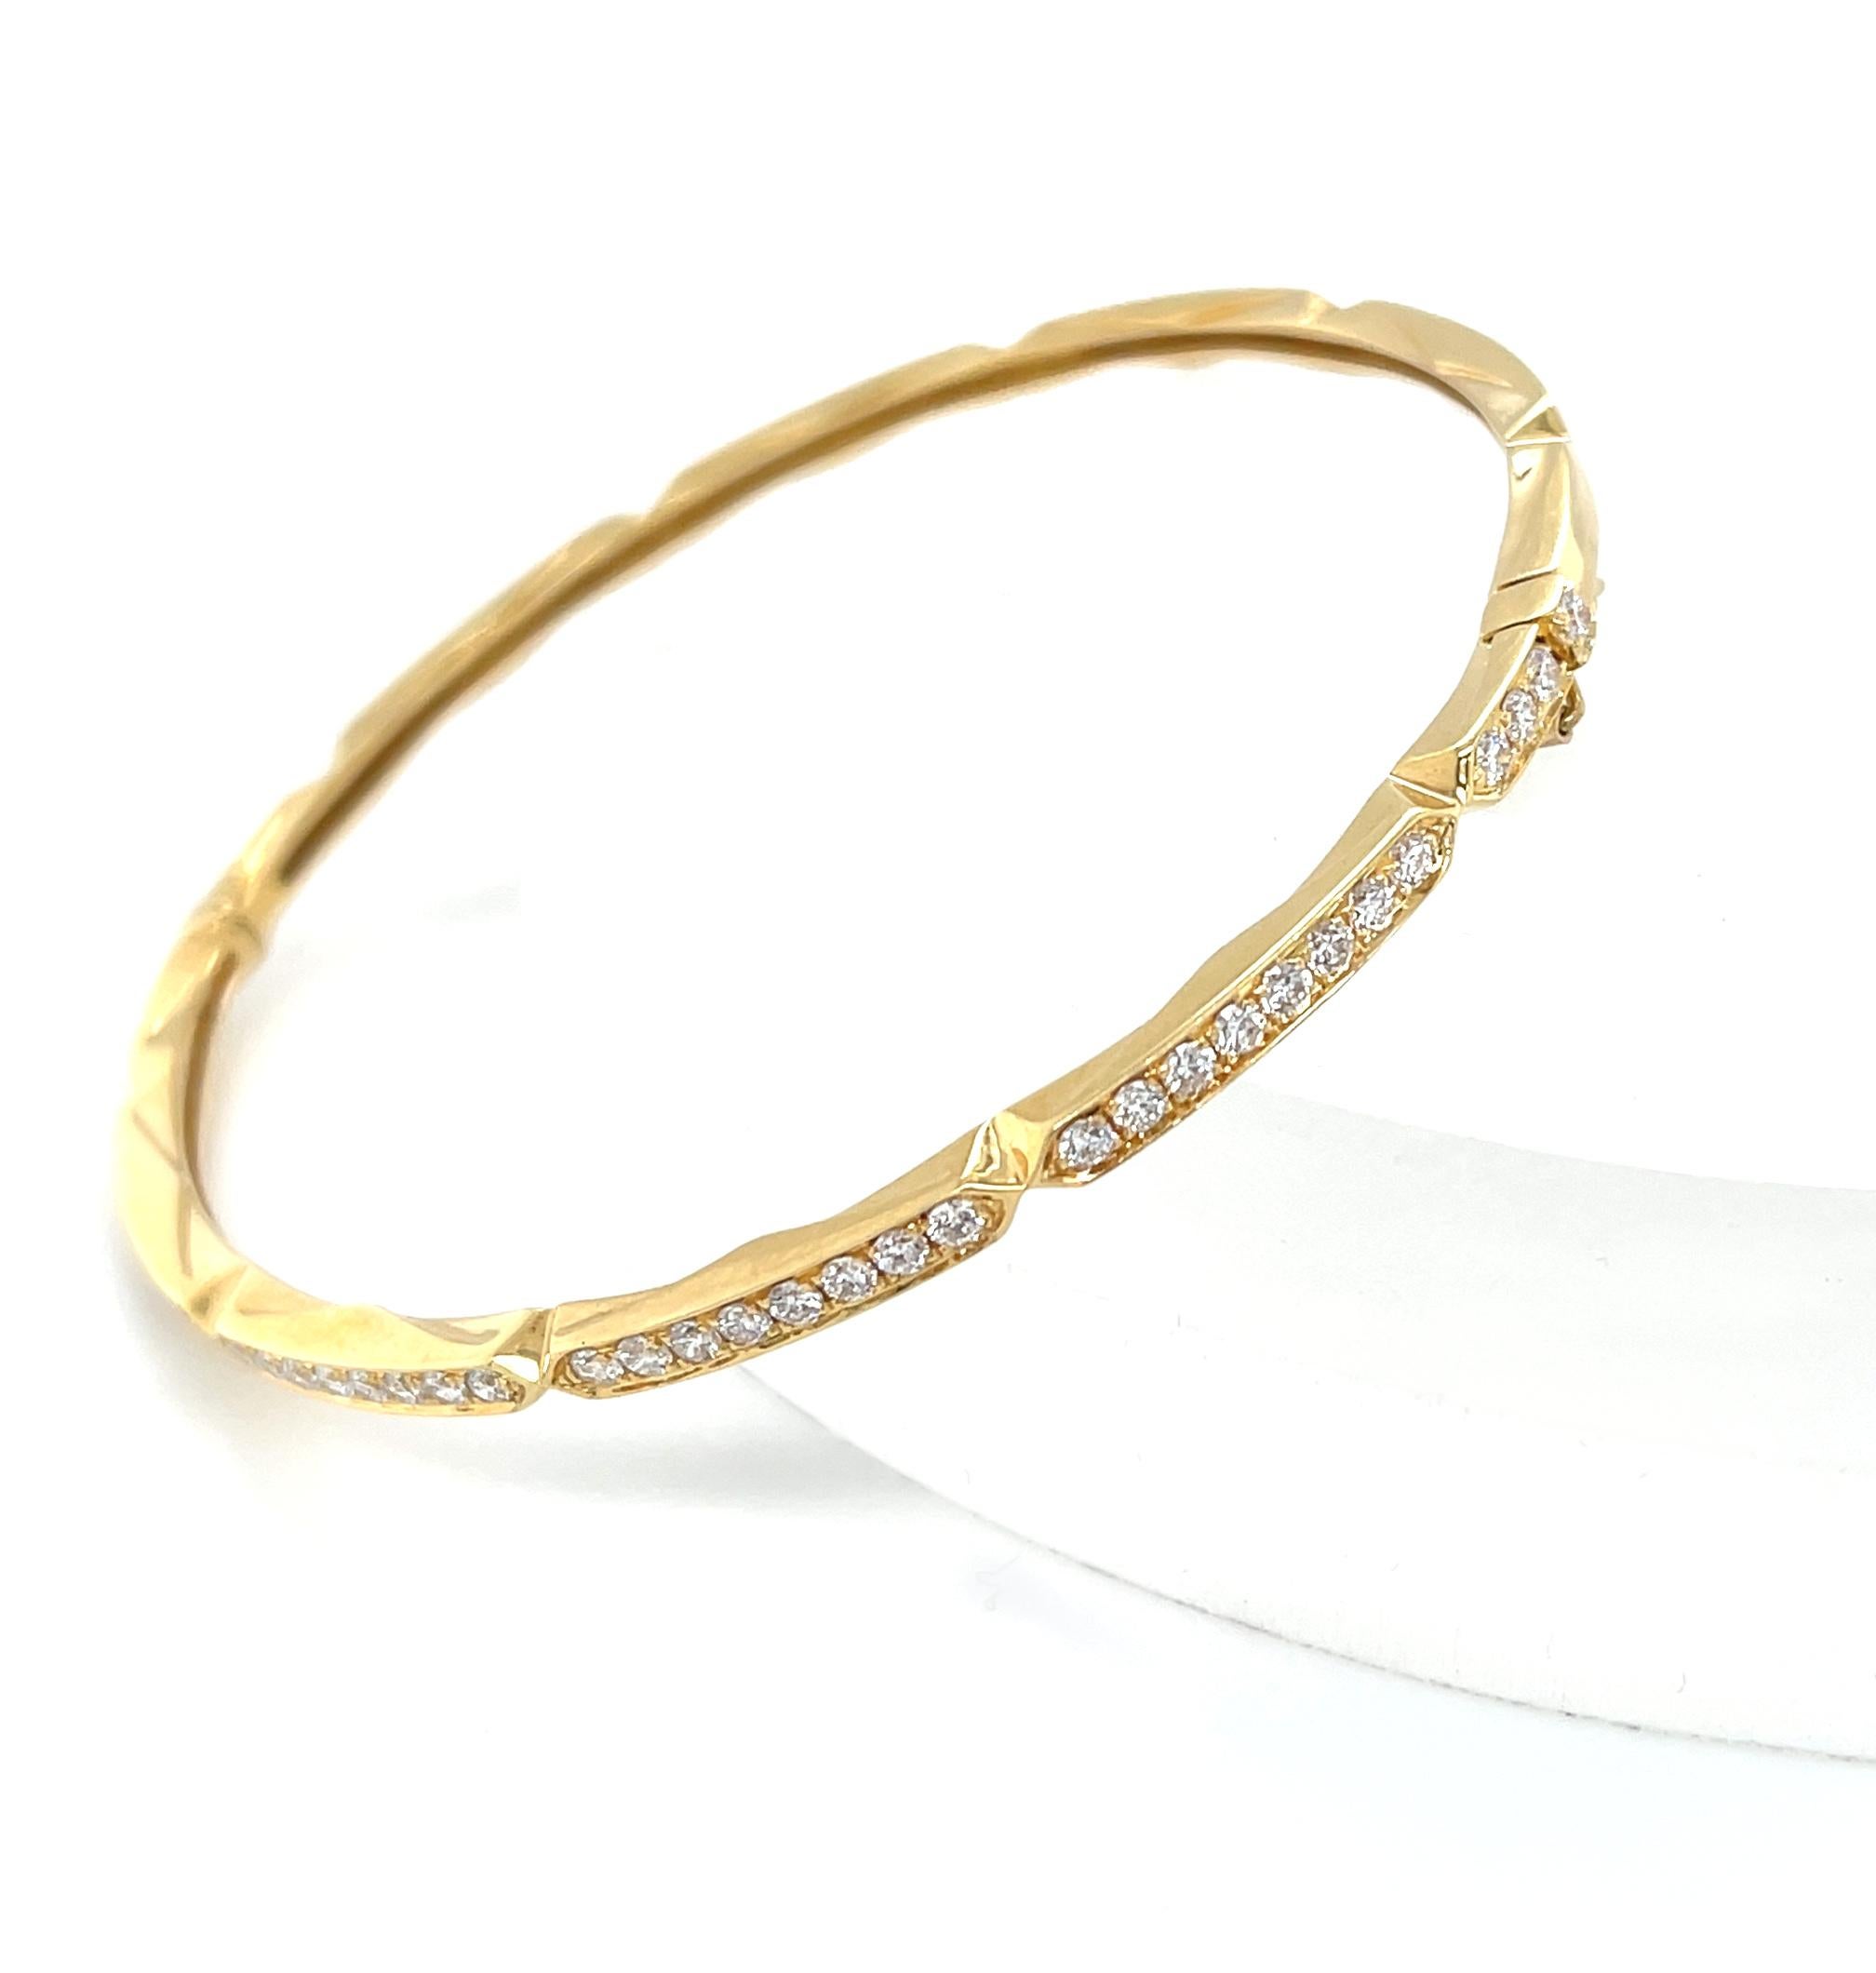 This beautifully tailored diamond bangle bracelet makes the perfect 